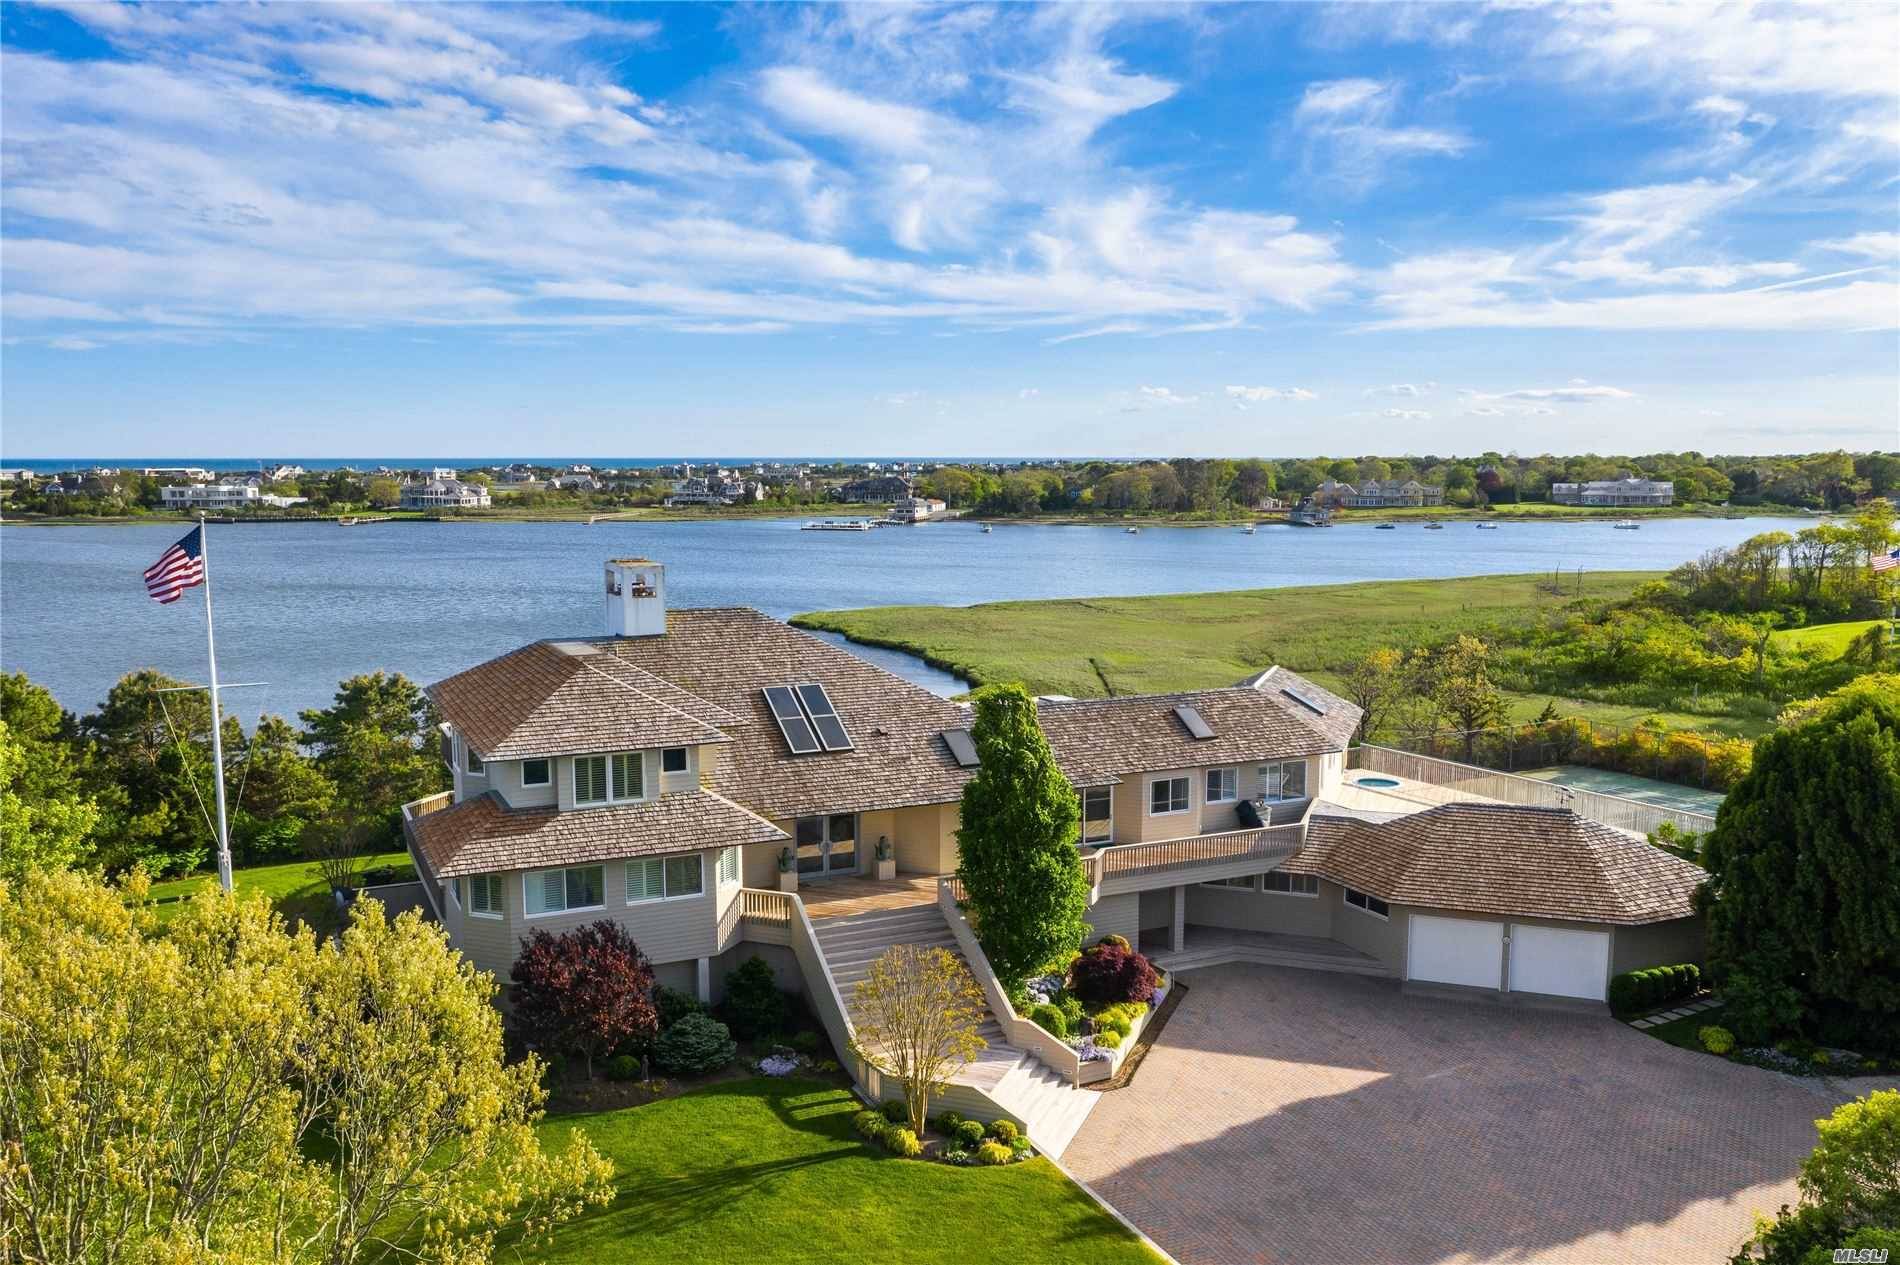 Highly desirable pvt location in Quogue.